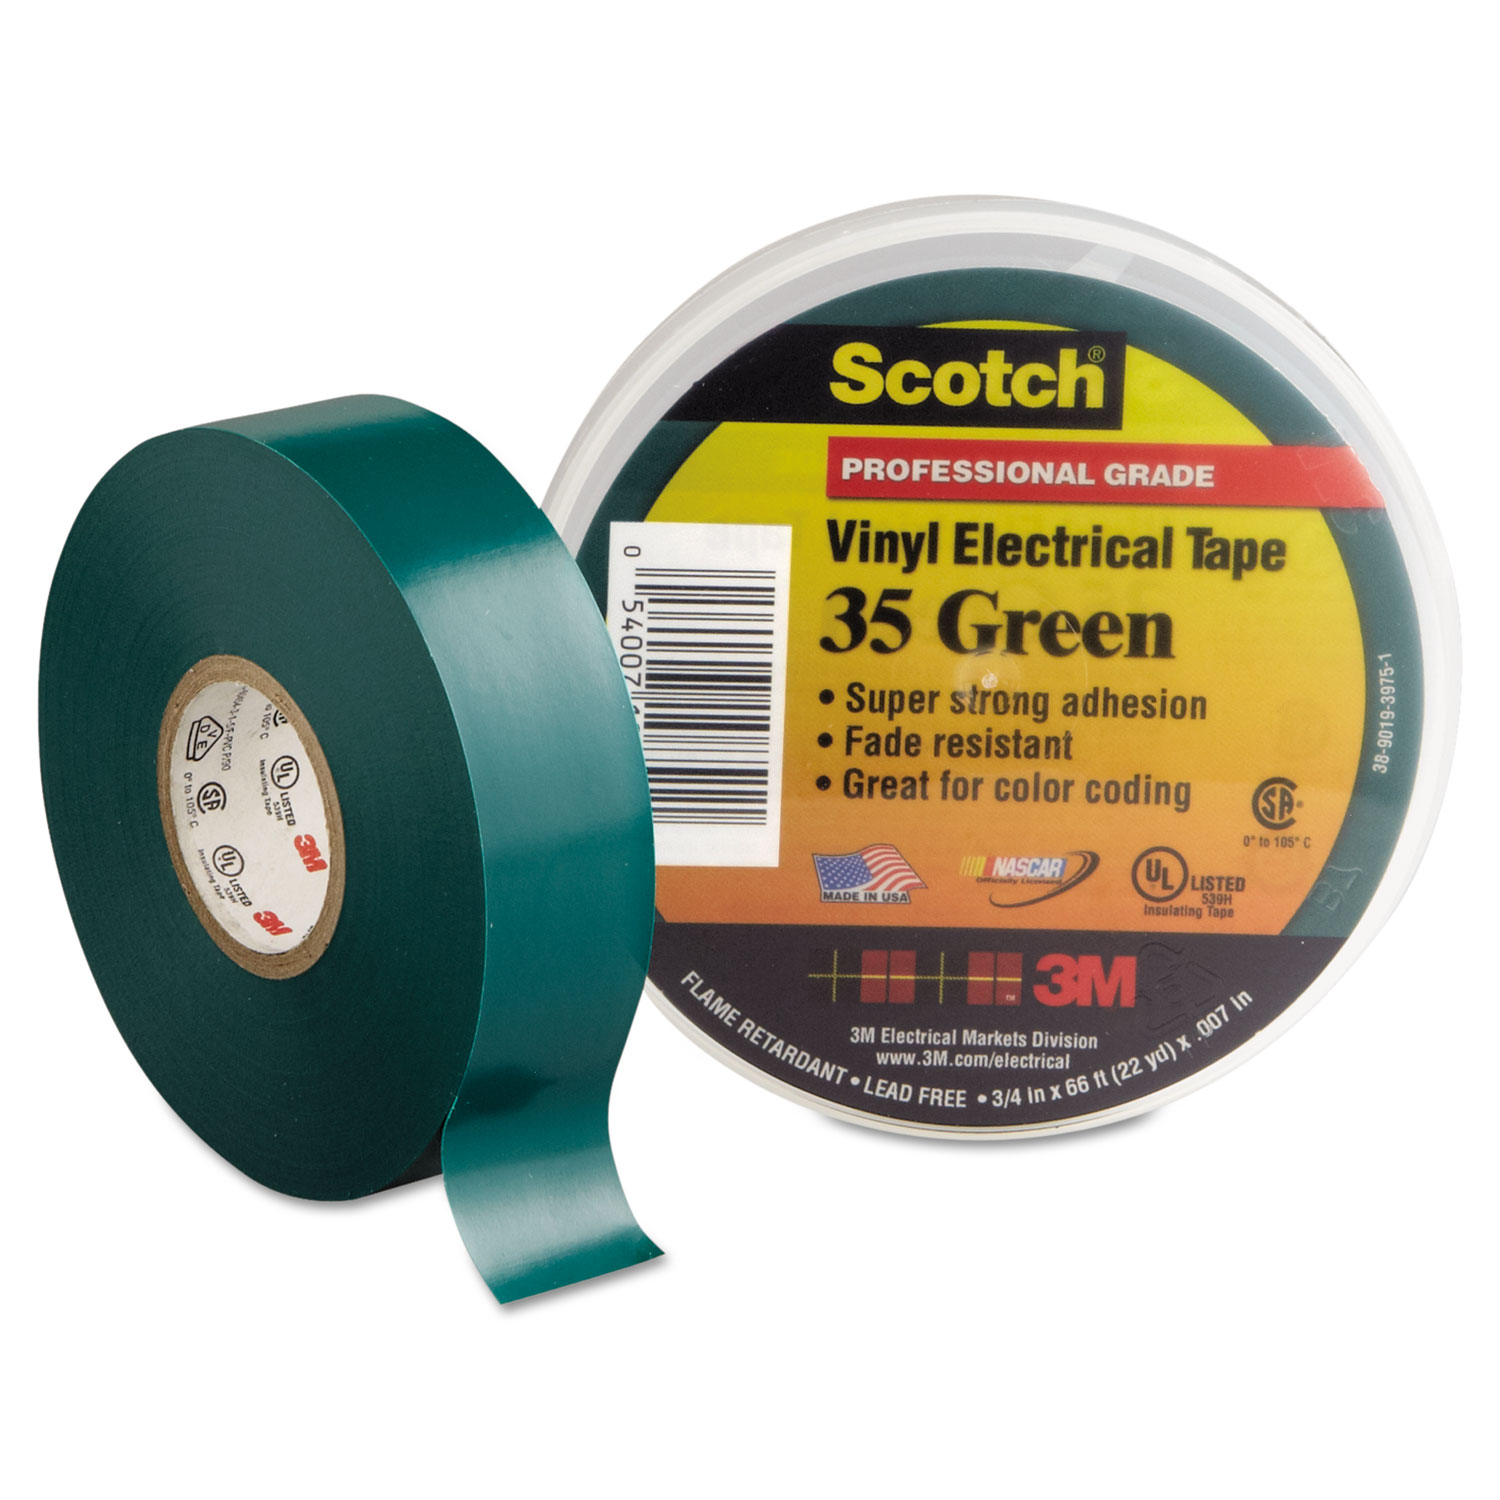  3M 10851-DL-10 Scotch 35 Vinyl Electrical Color Coding Tape, 3 Core, 0.75 x 66 ft, Green (MMM10851) 